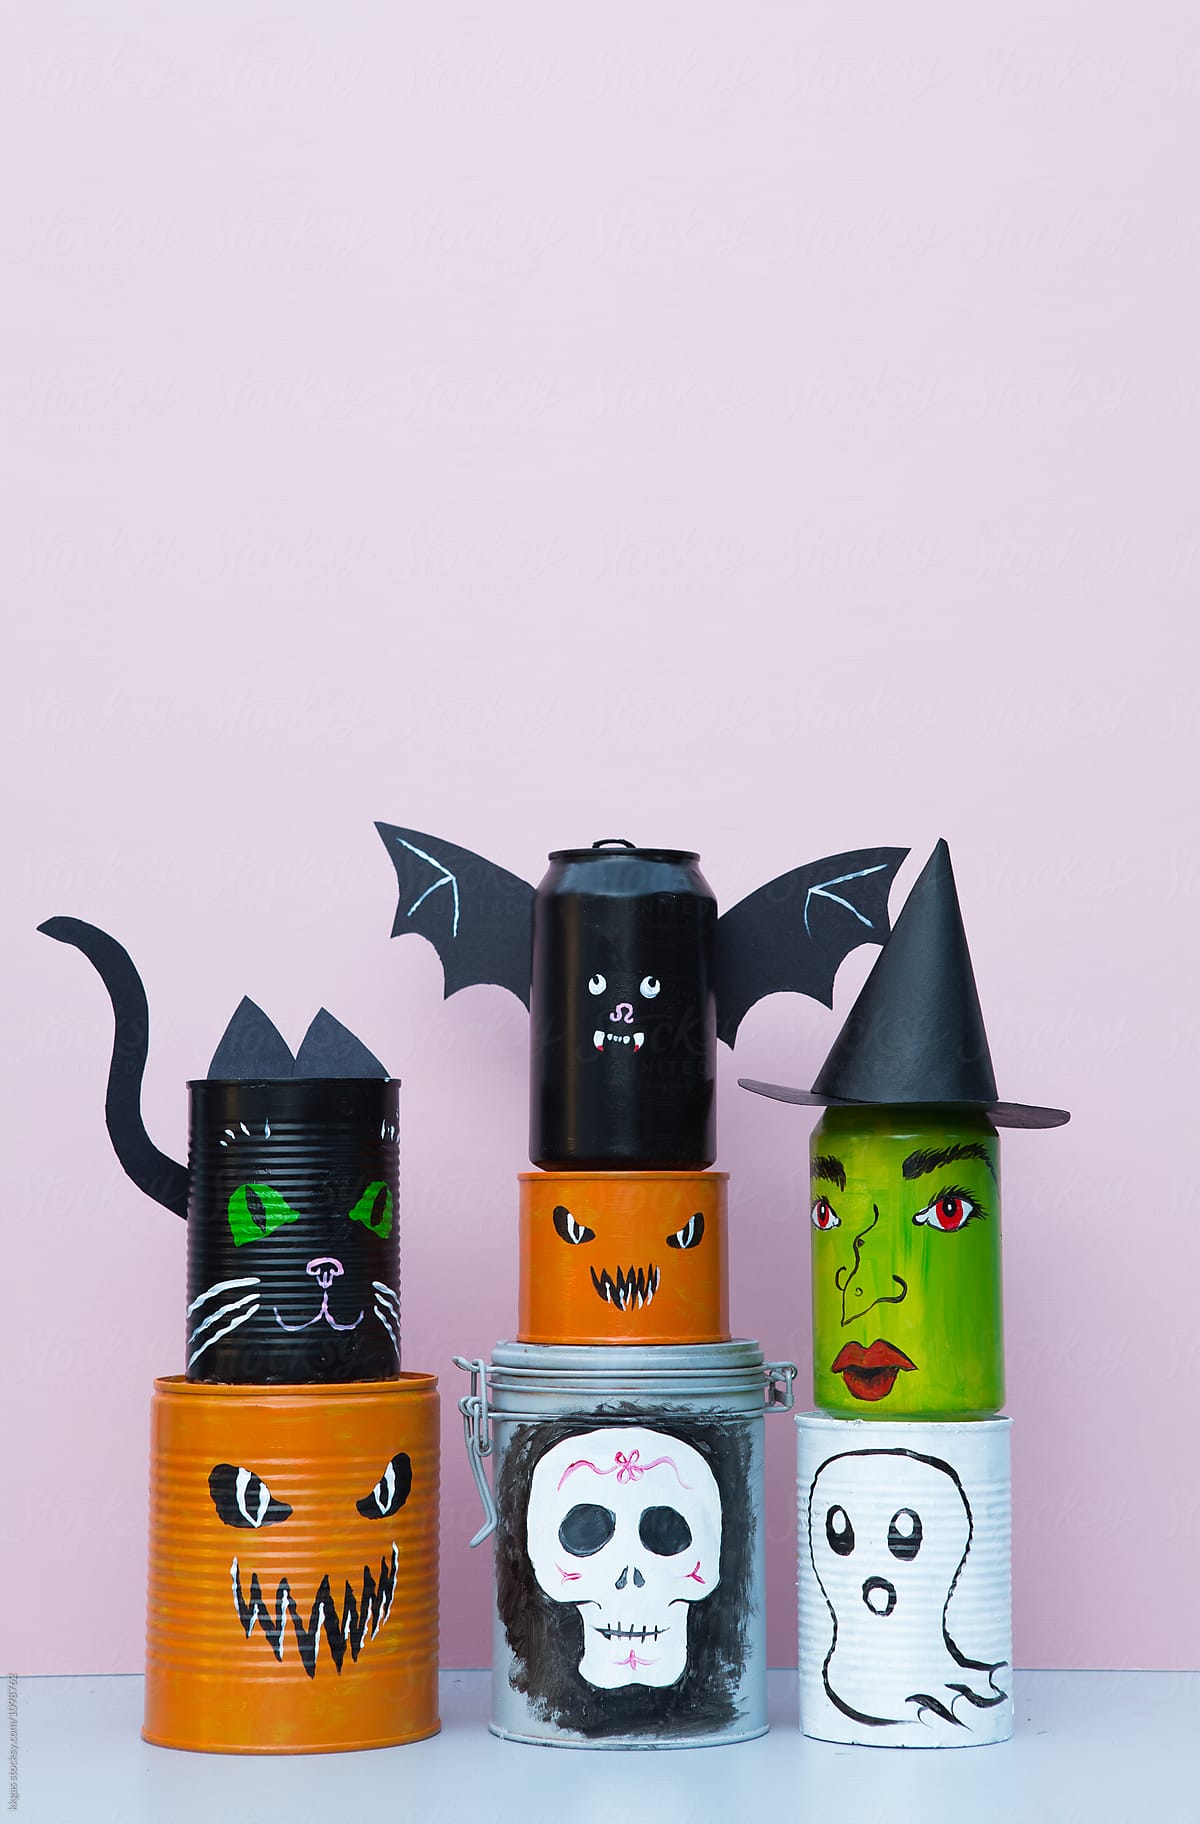 Cans decorated with Halloween characters including a witch, bat, ghost and jack-o-lantern